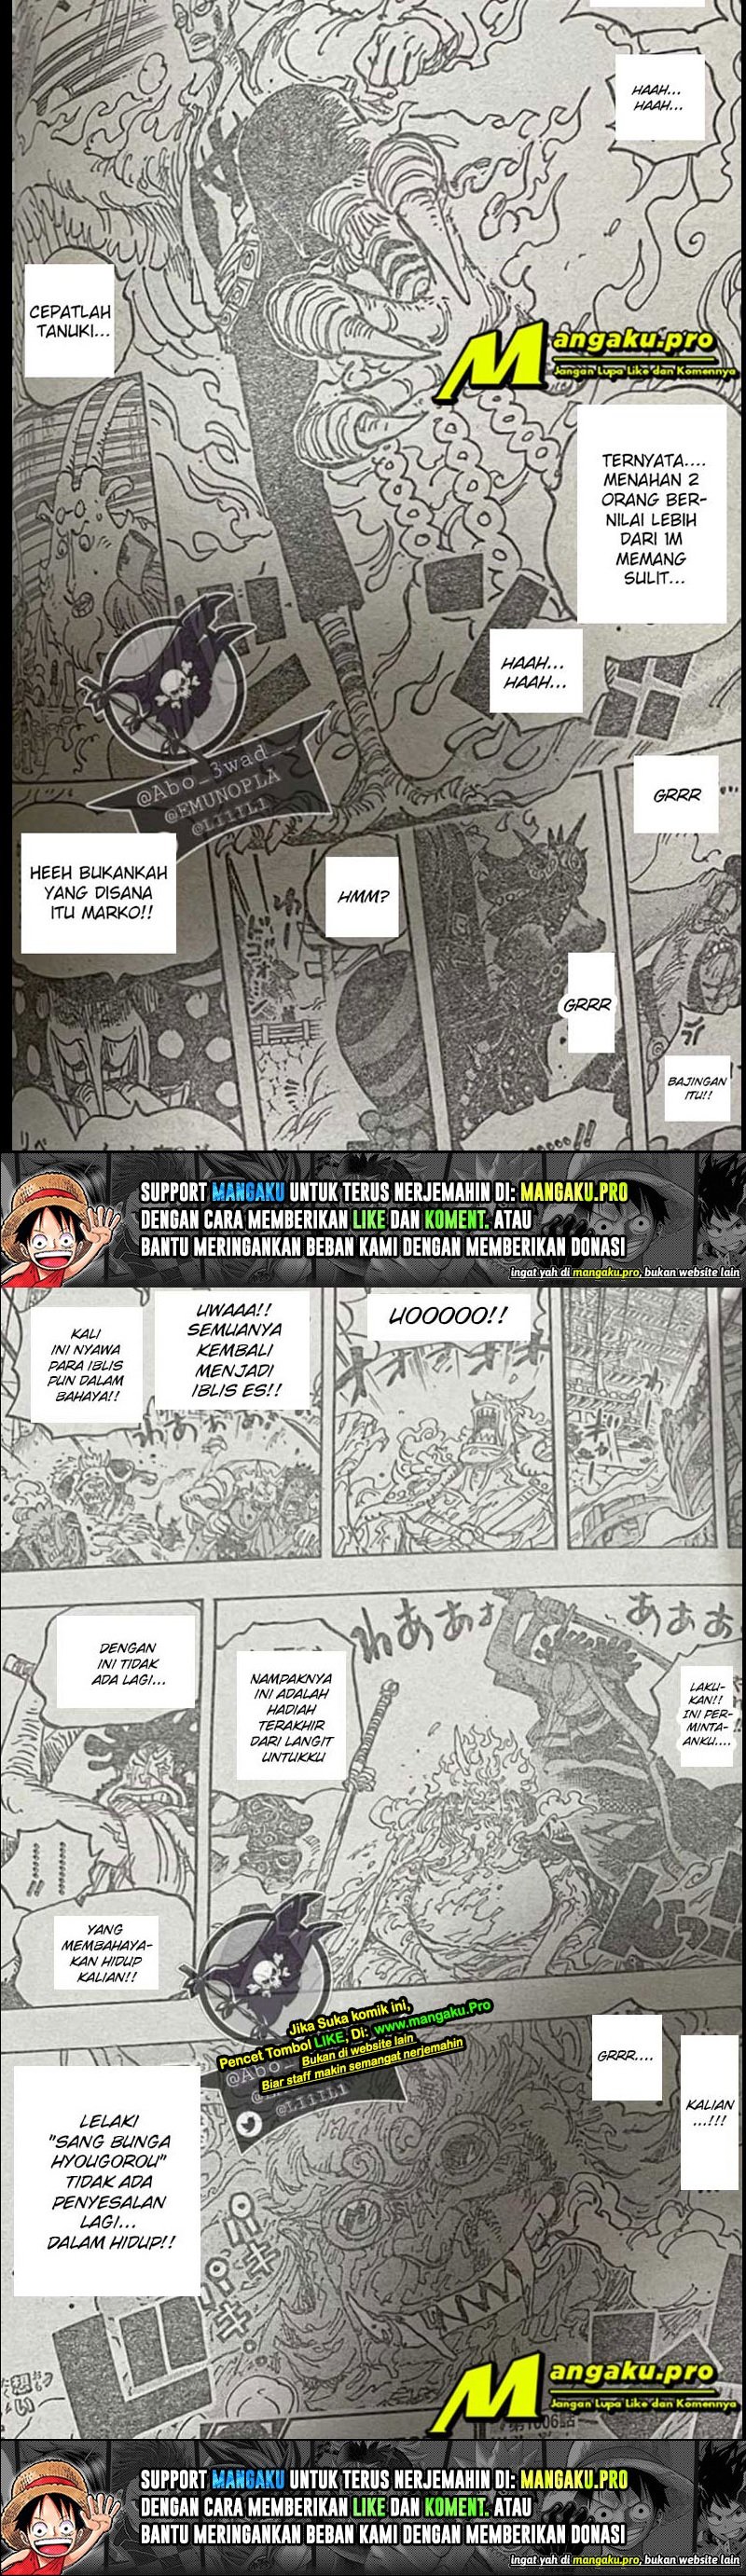 One Piece Chapter 1006 Lq - 31